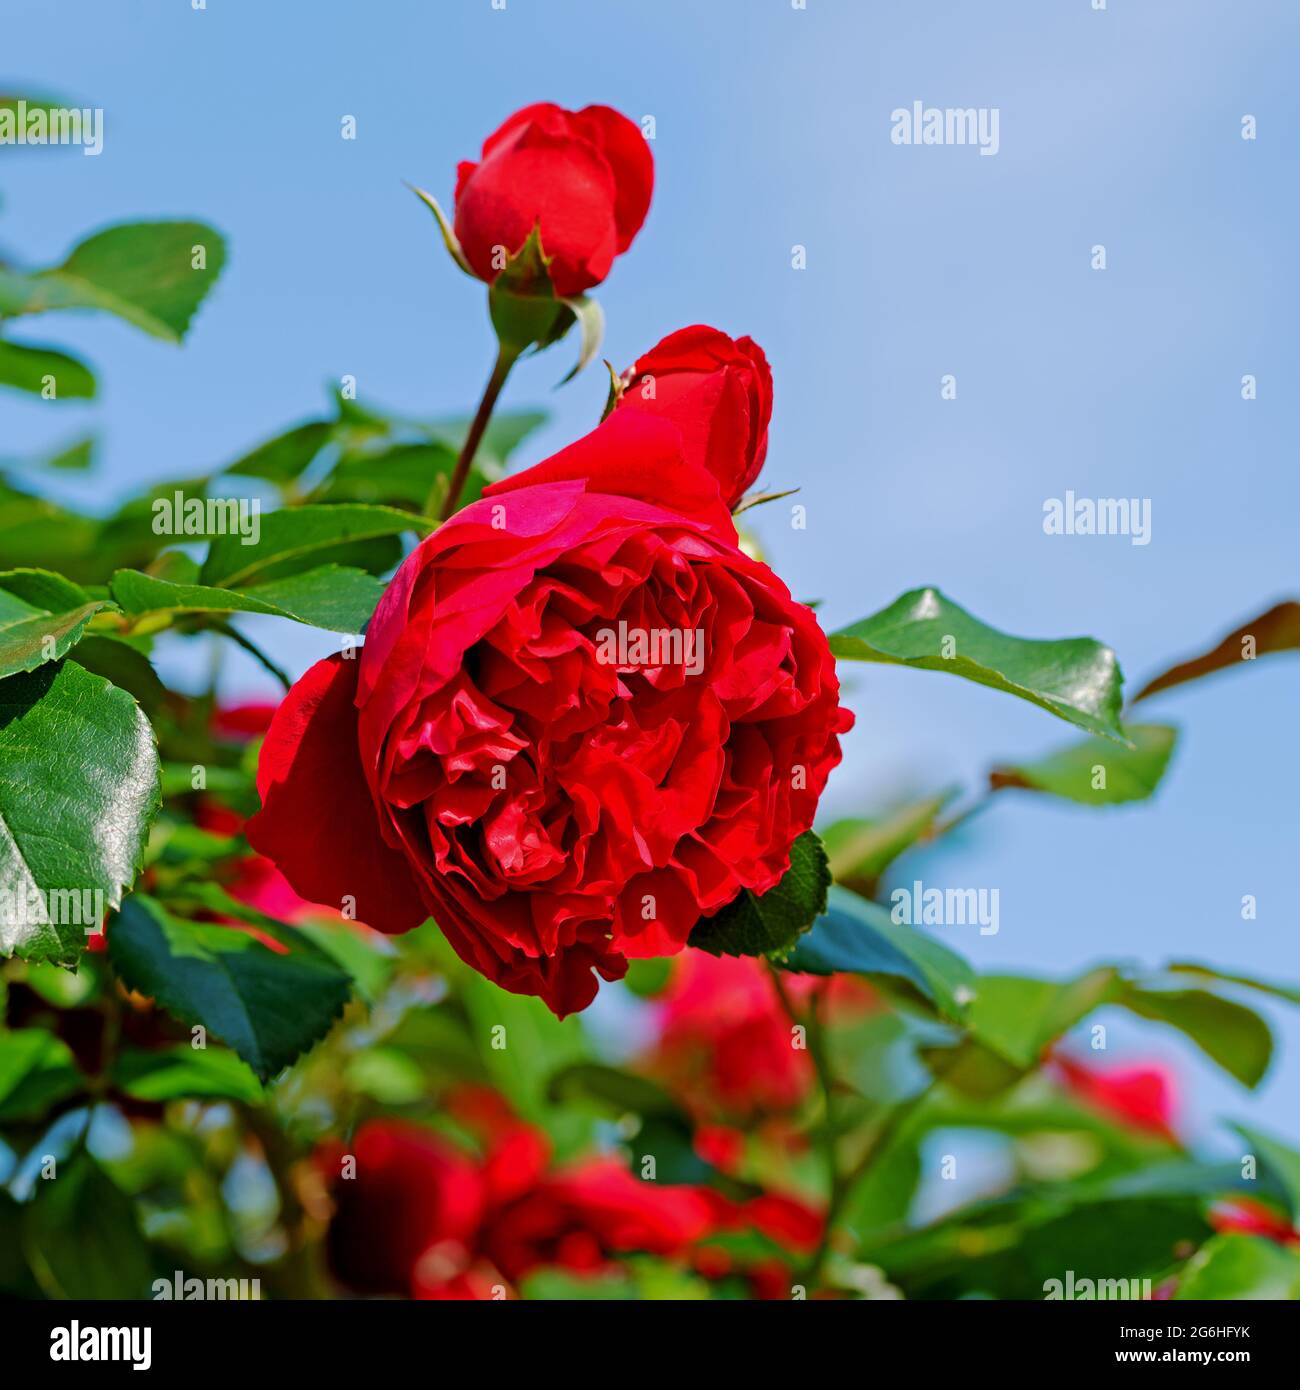 Blooming red hybrid tea roses against a blue sky Stock Photo